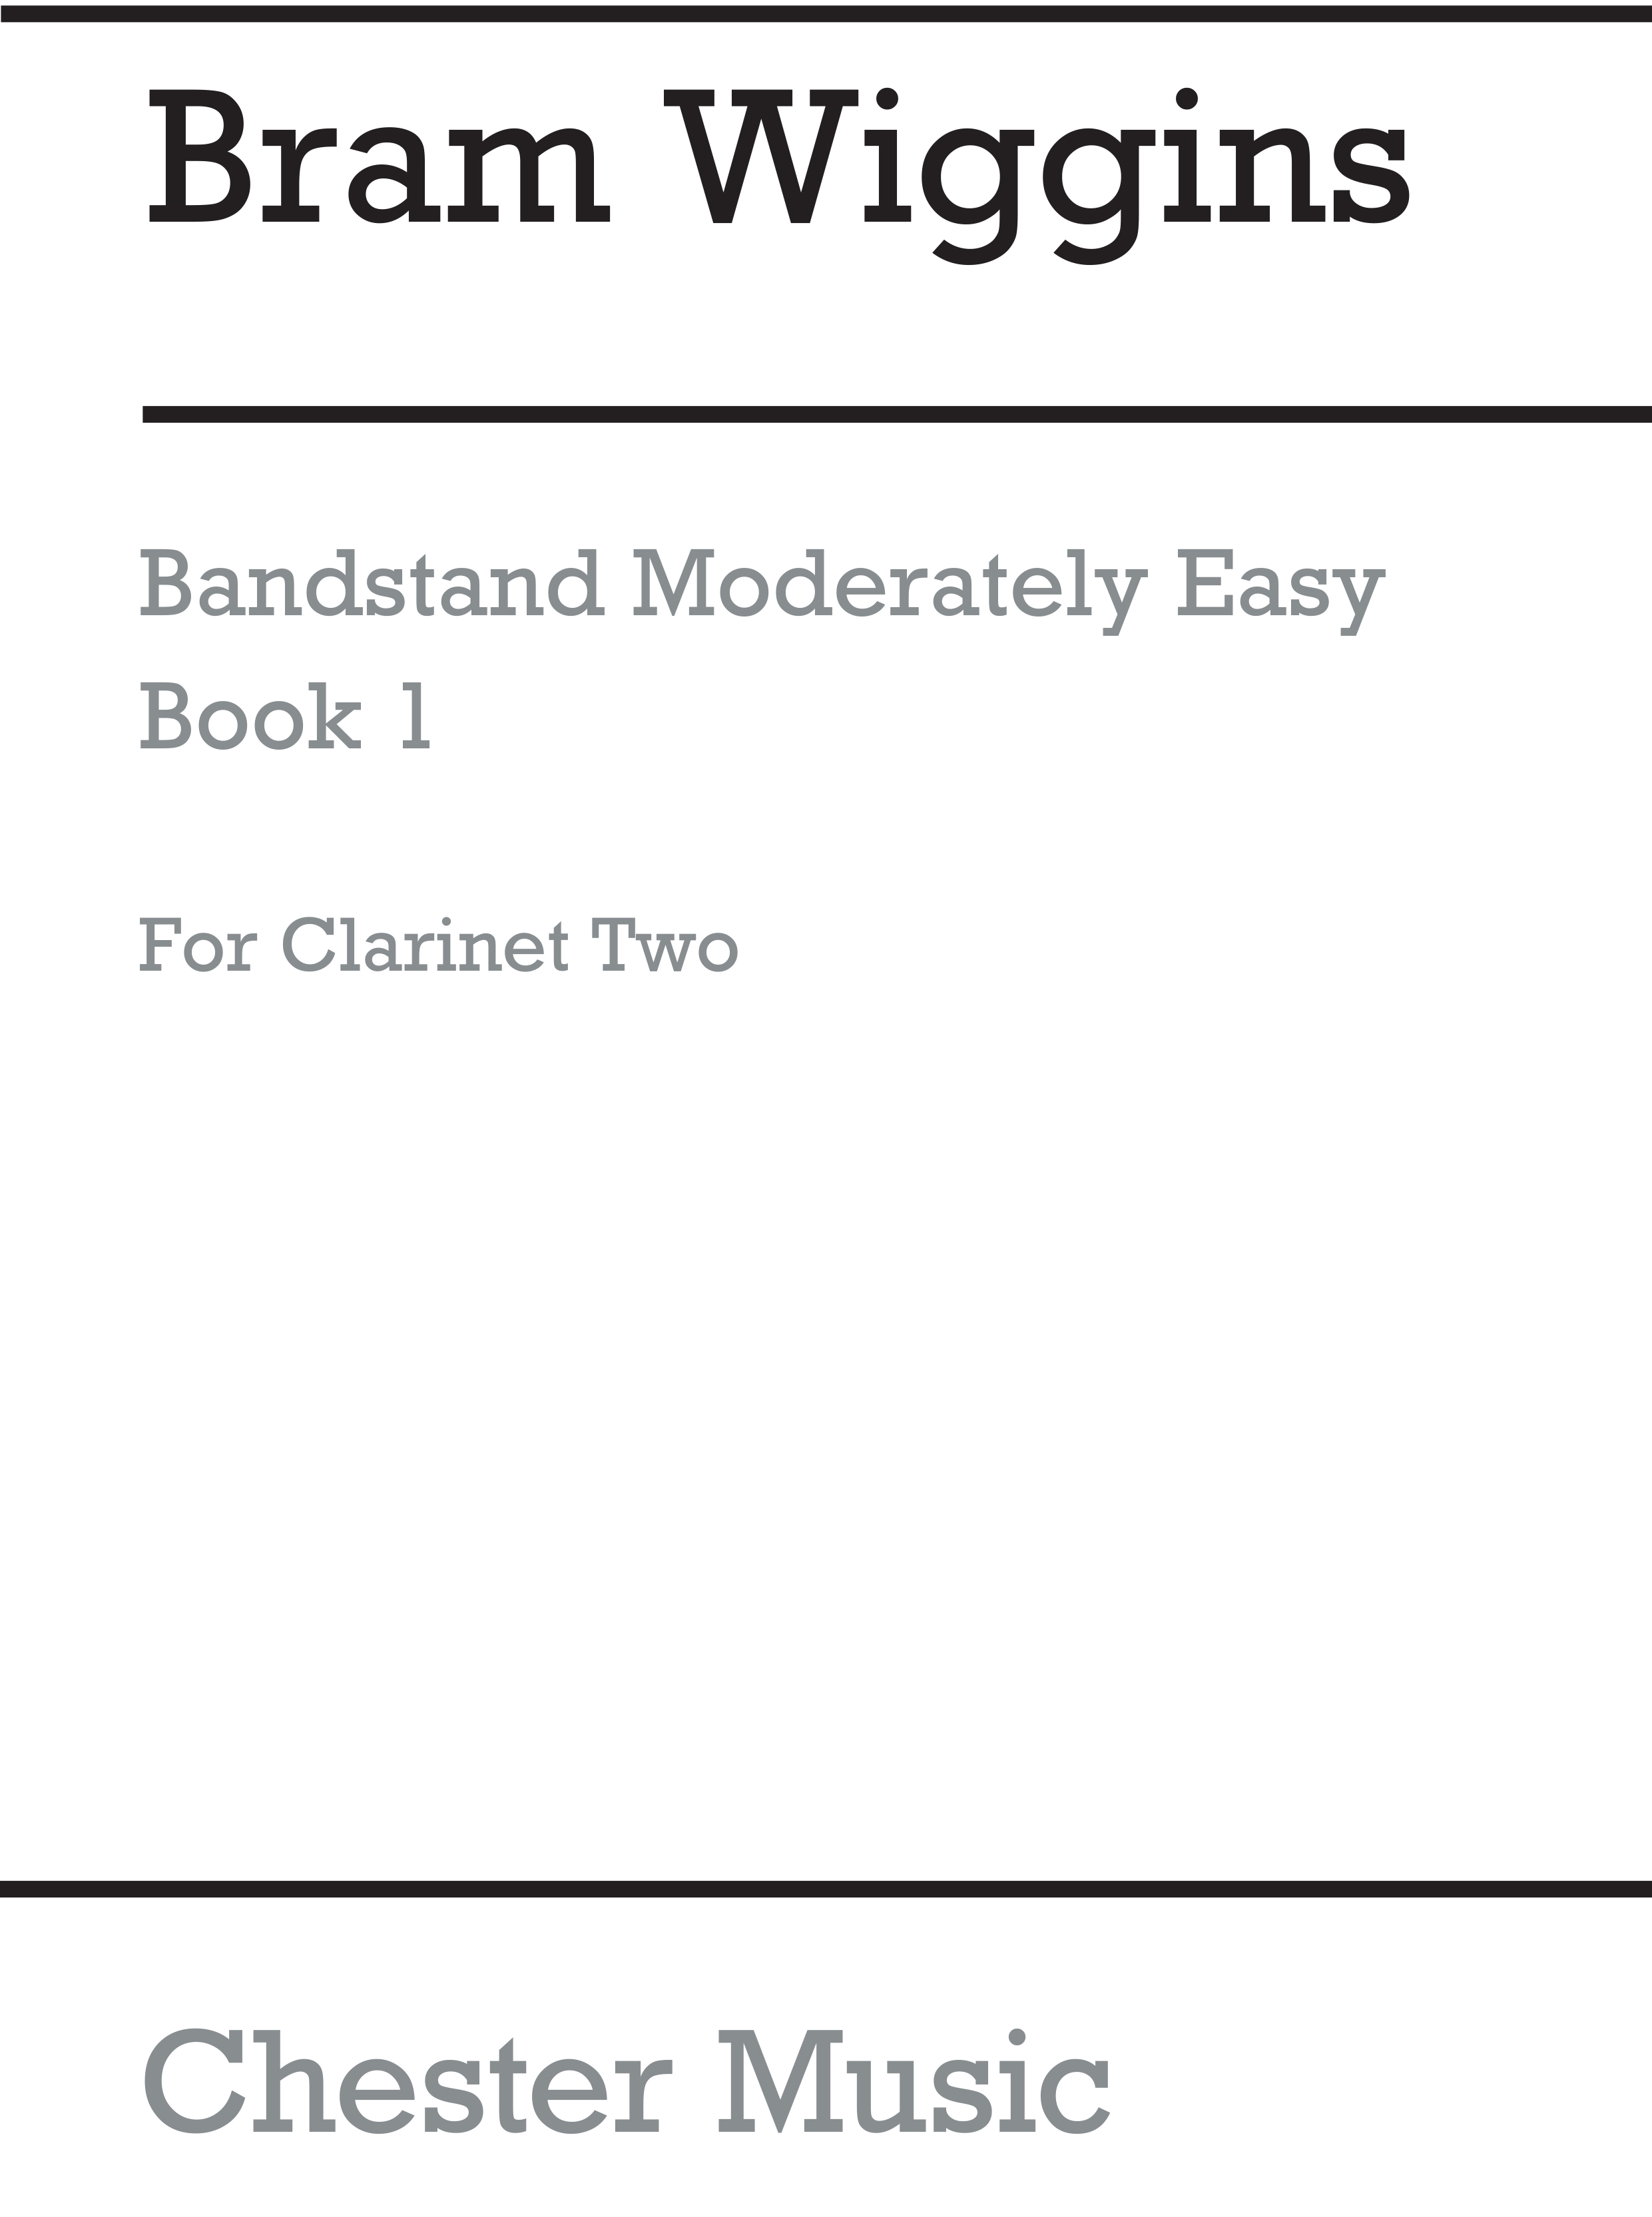 Bram Wiggins: Bandstand Moderately Easy Book 1 (Clarinet 2): Concert Band: Part